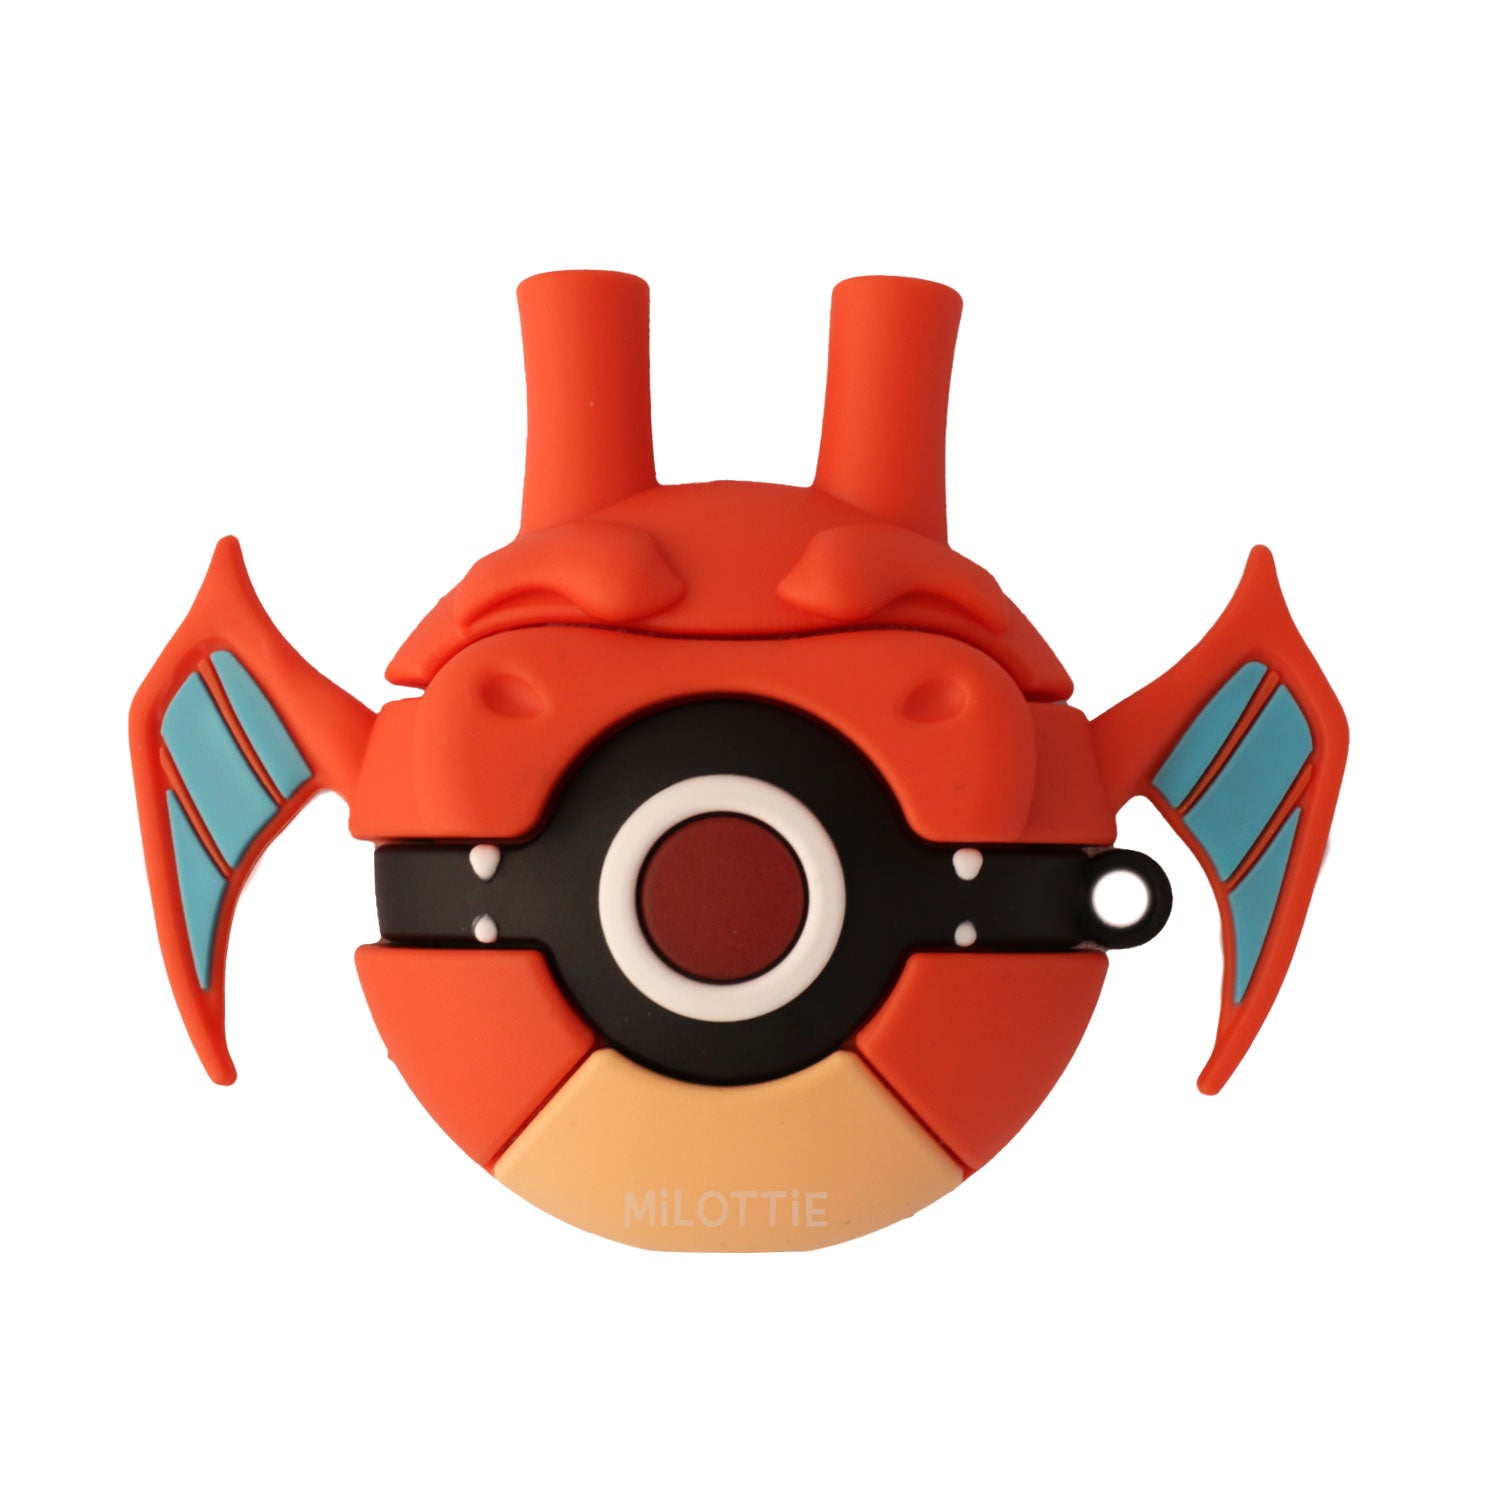 Charzard pokeball airpods case